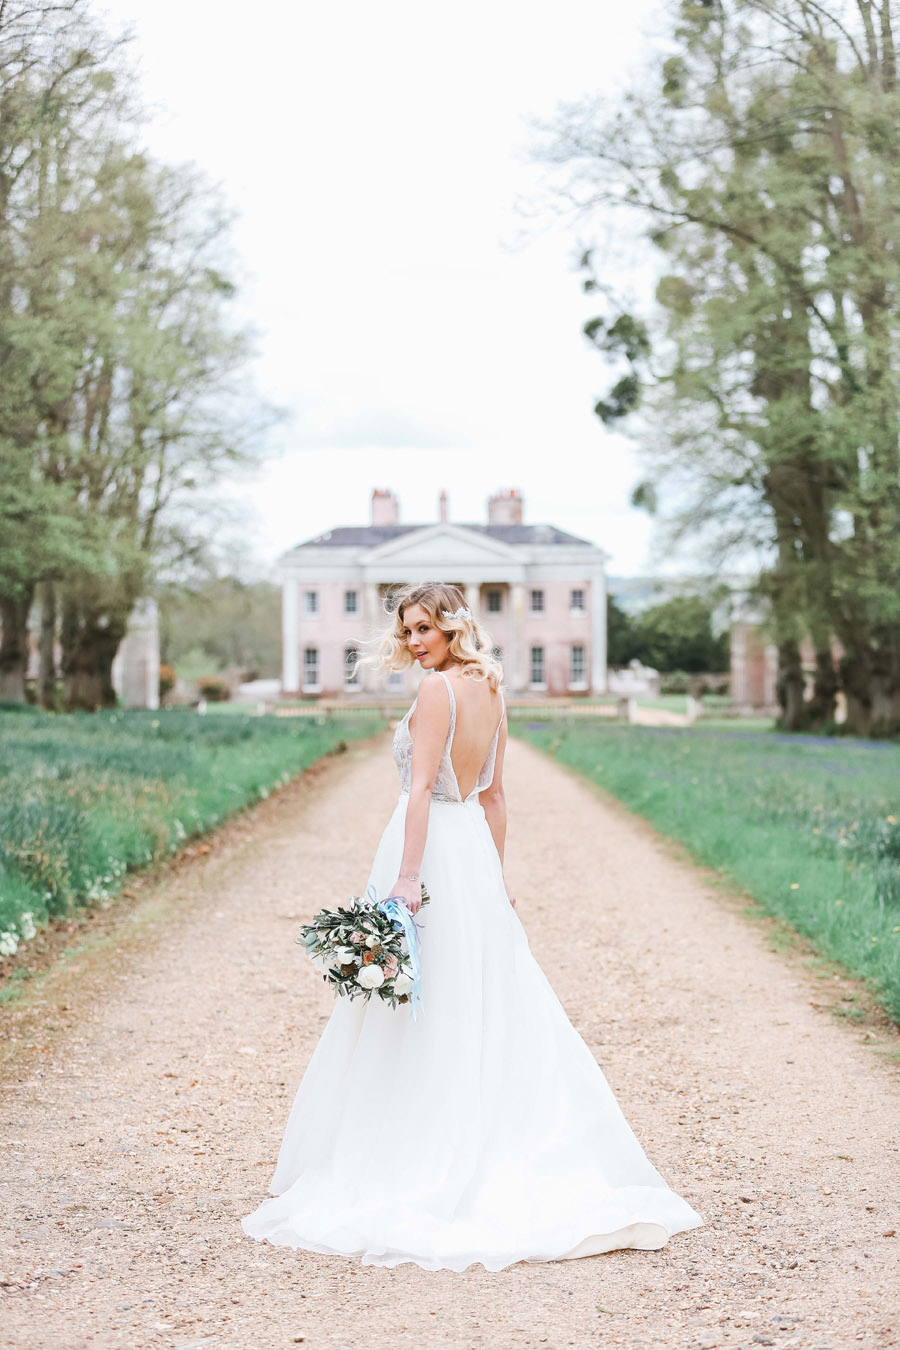 Romantic wedding ideas from Hale Park, photo by Charlotte Wise Photography (51)